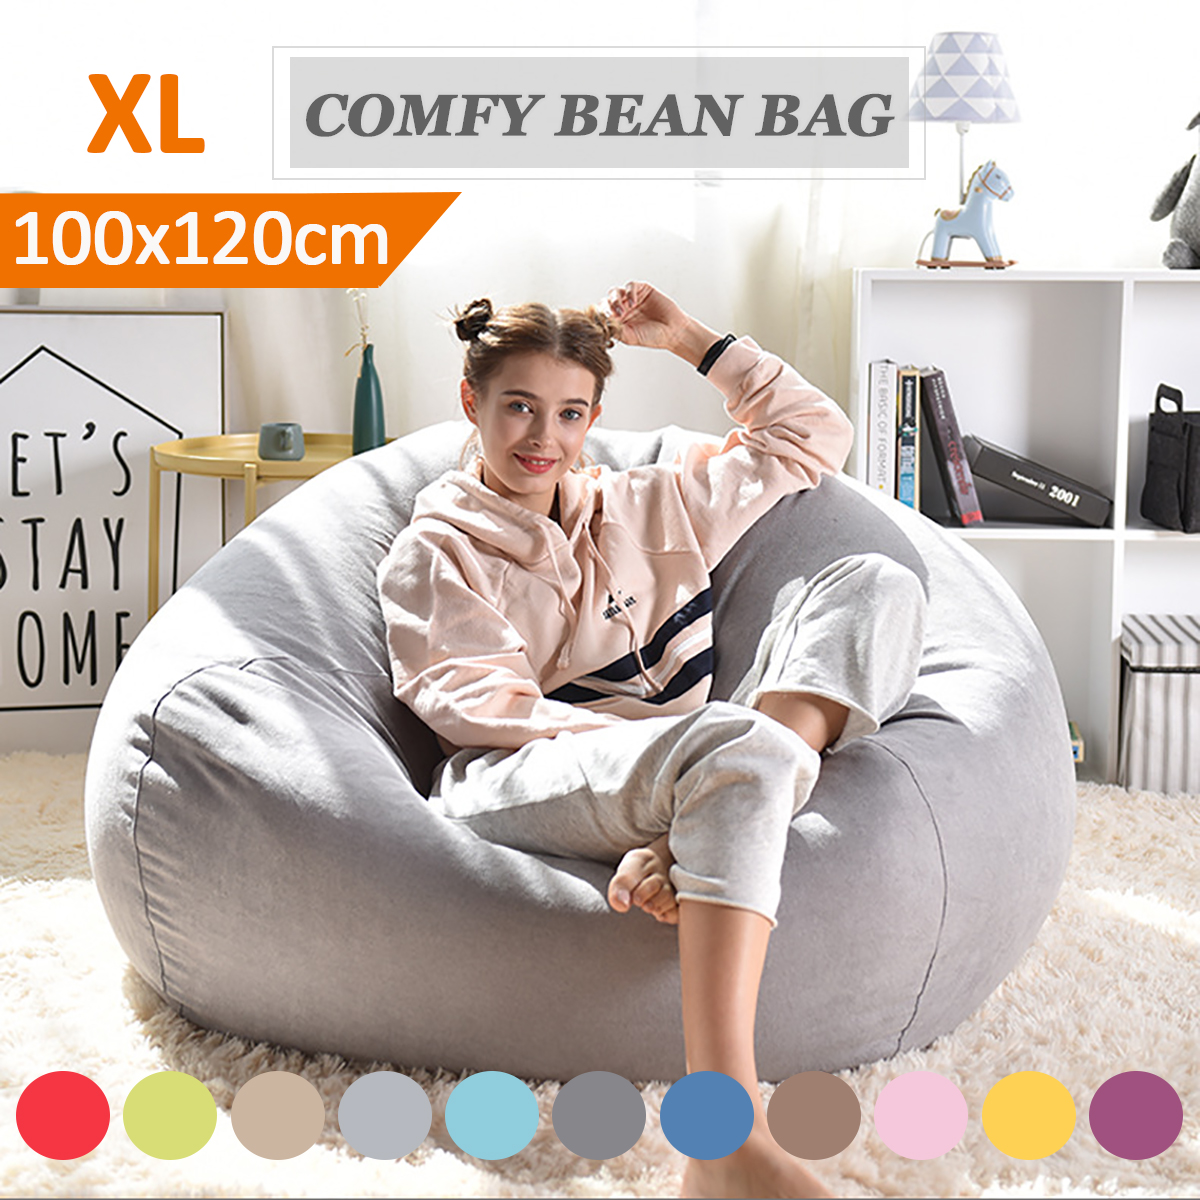 Details about   Extra Large Bean Bag Chair Lazy Sofa Bed Cover Indoor Outdoor Game Seat USA 